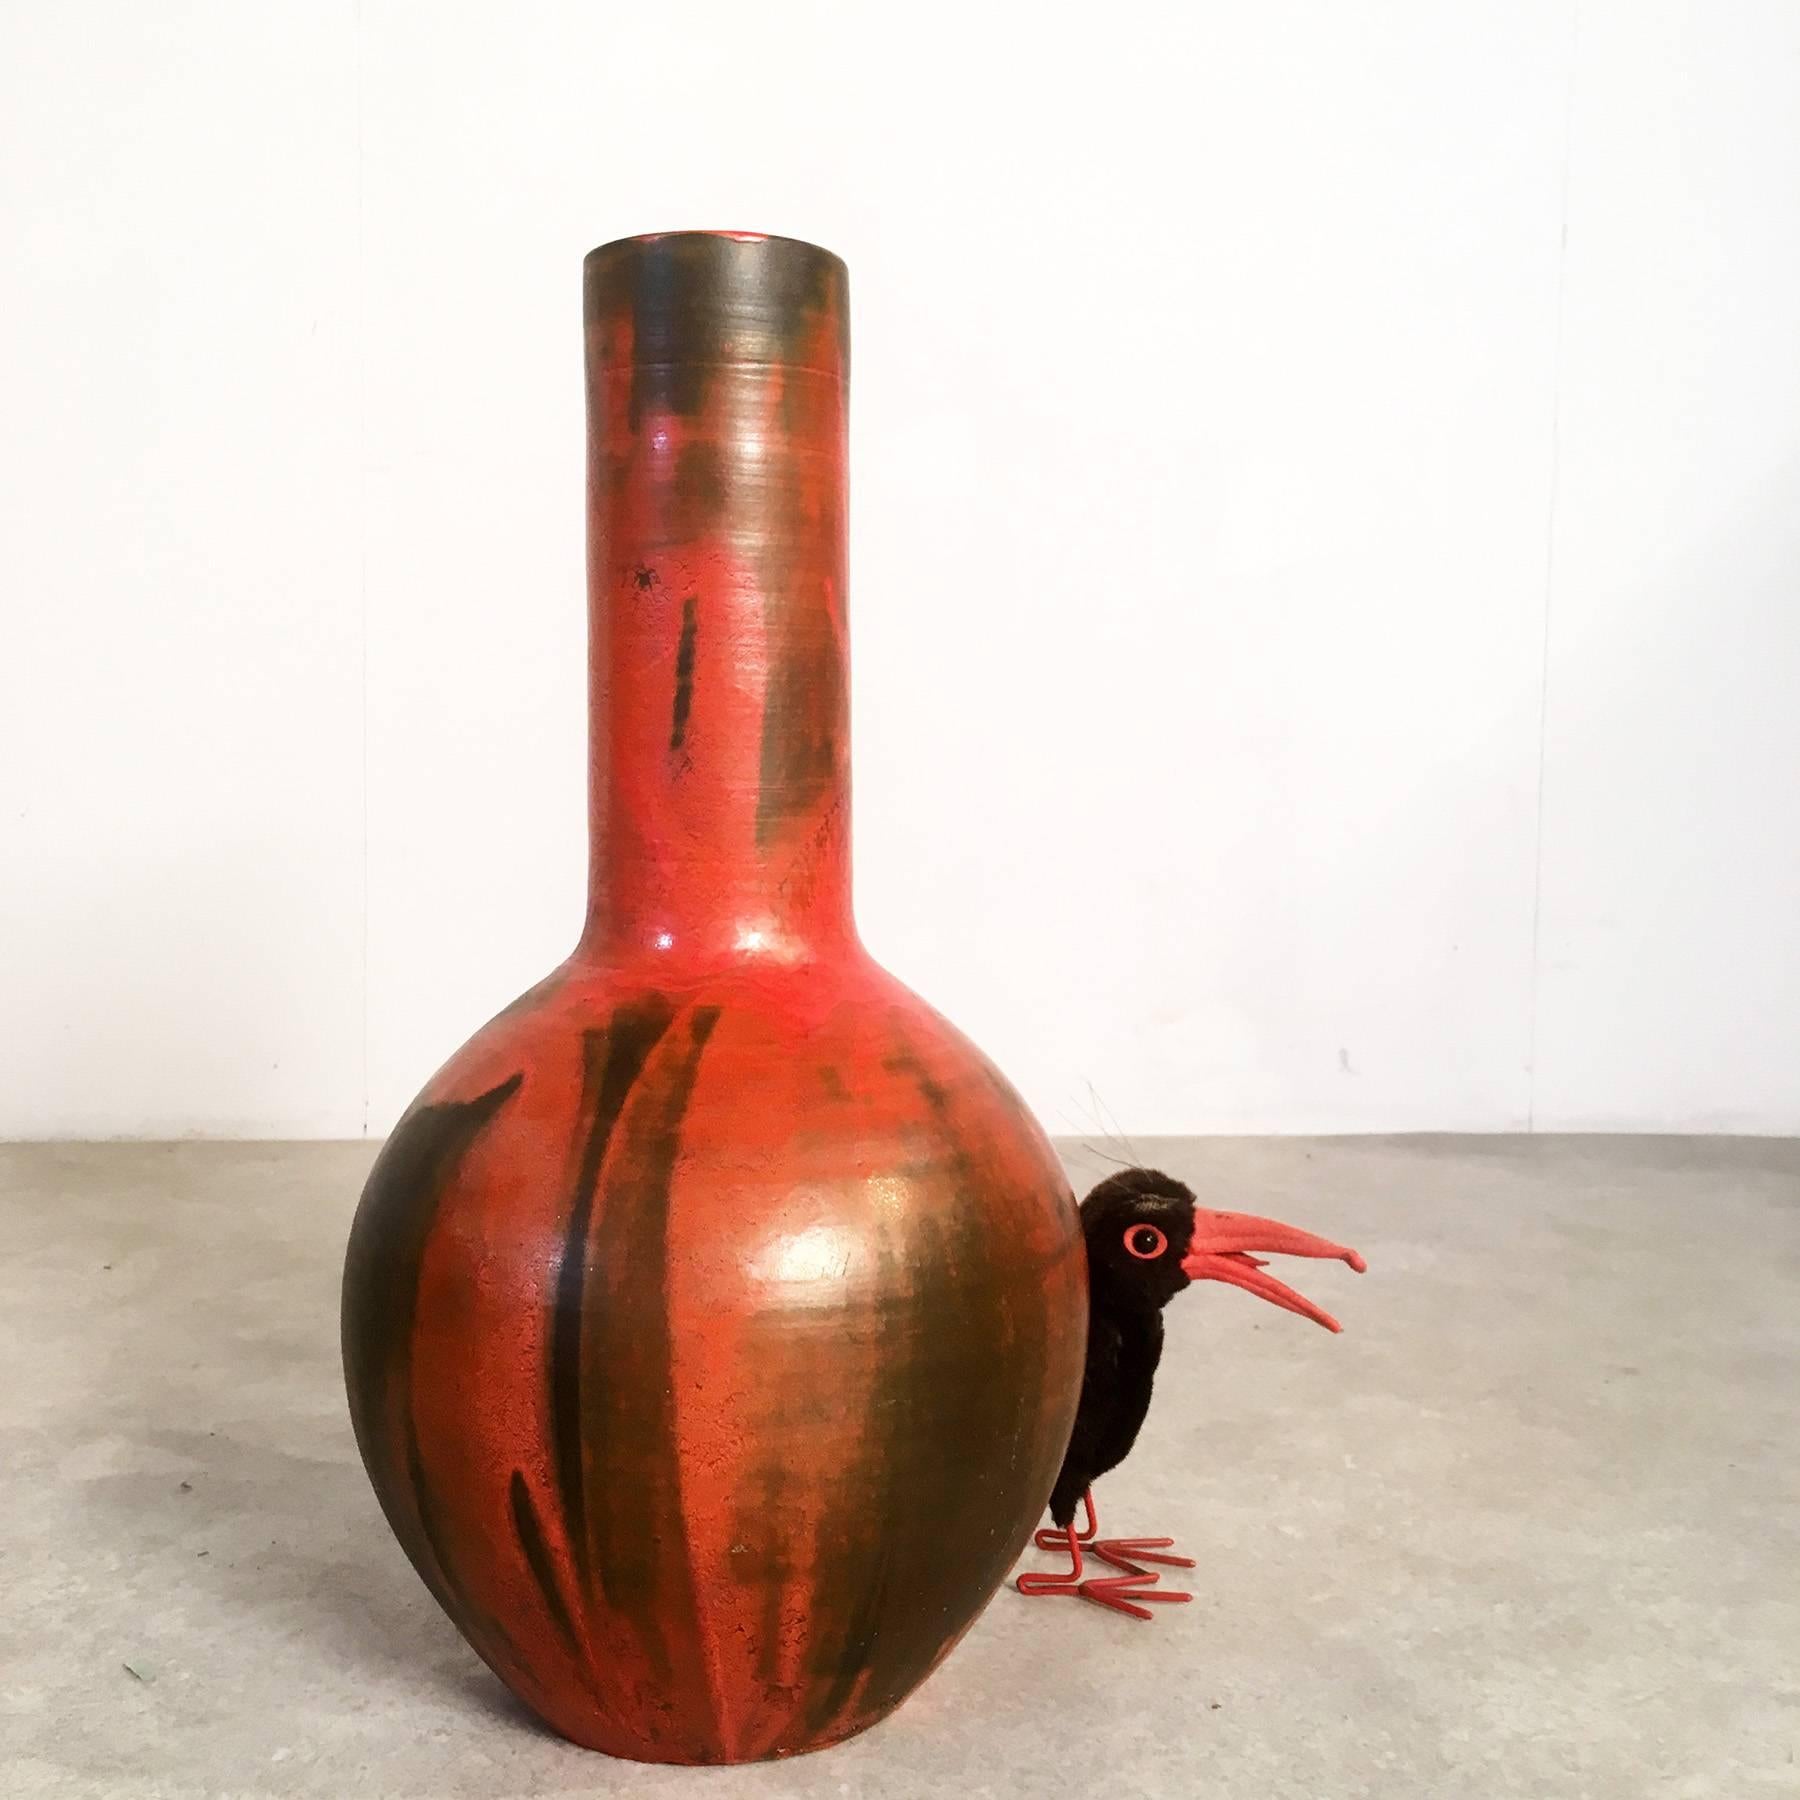 Stunning West German Pottery studio ceramic floor vase from the 1960s. Great piece, beautifully designed. The vase is completely handmade by an unknown artist. It is made of red clay and glazed in a dark greenish brown with a bright orange drip